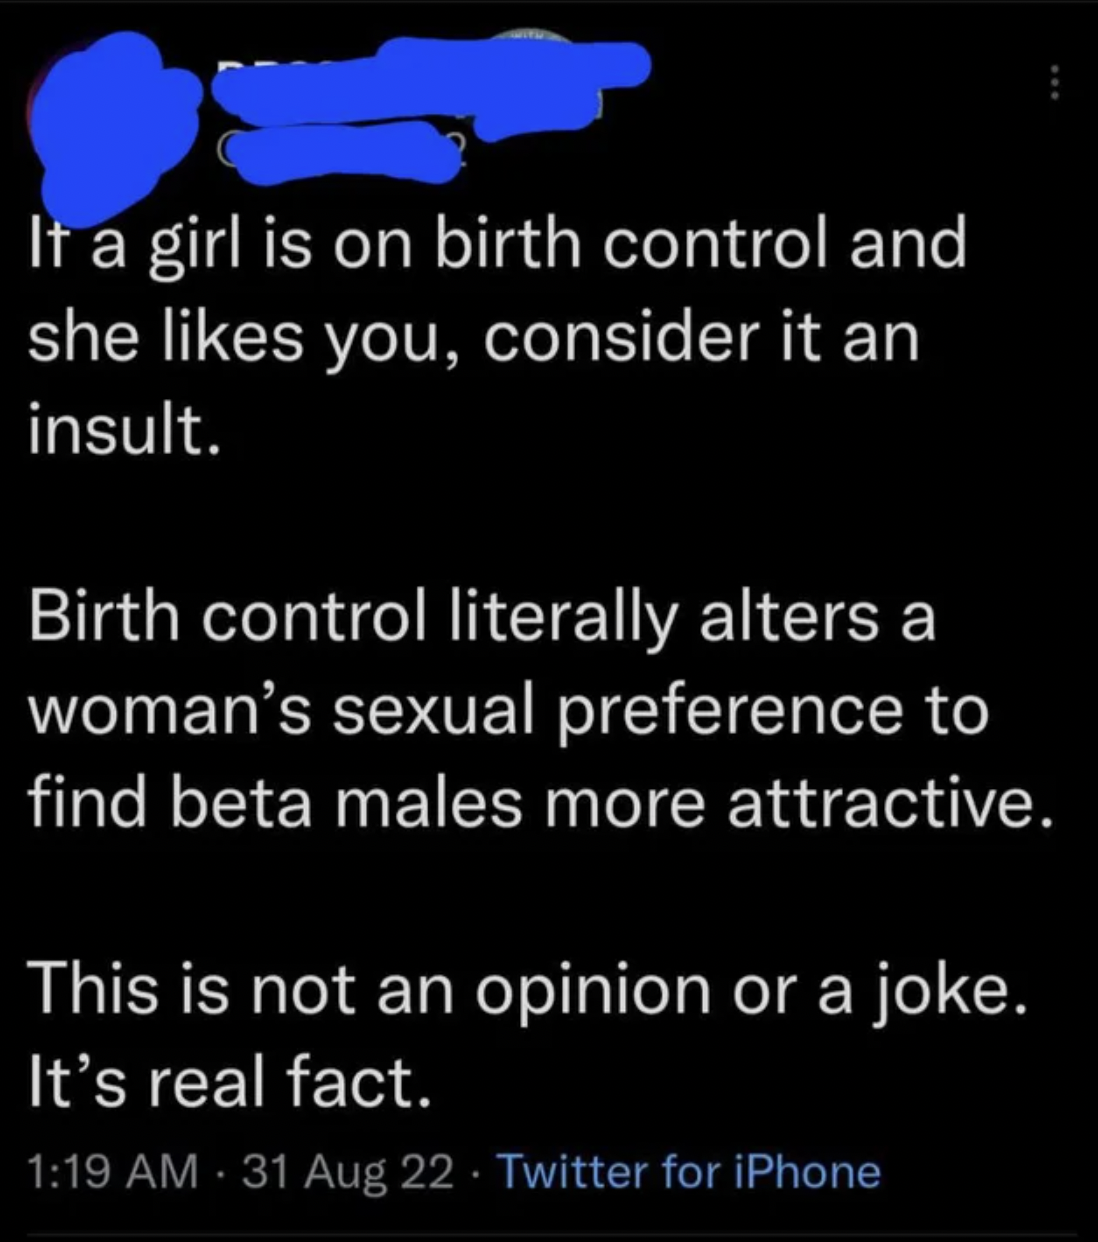 Confidently incorrect people - atmosphere - It a girl is on birth control and she you, consider it an insult. Birth control literally alters a woman's sexual preference to find beta males more attractive. This is not an opinion or a joke. It's real fact